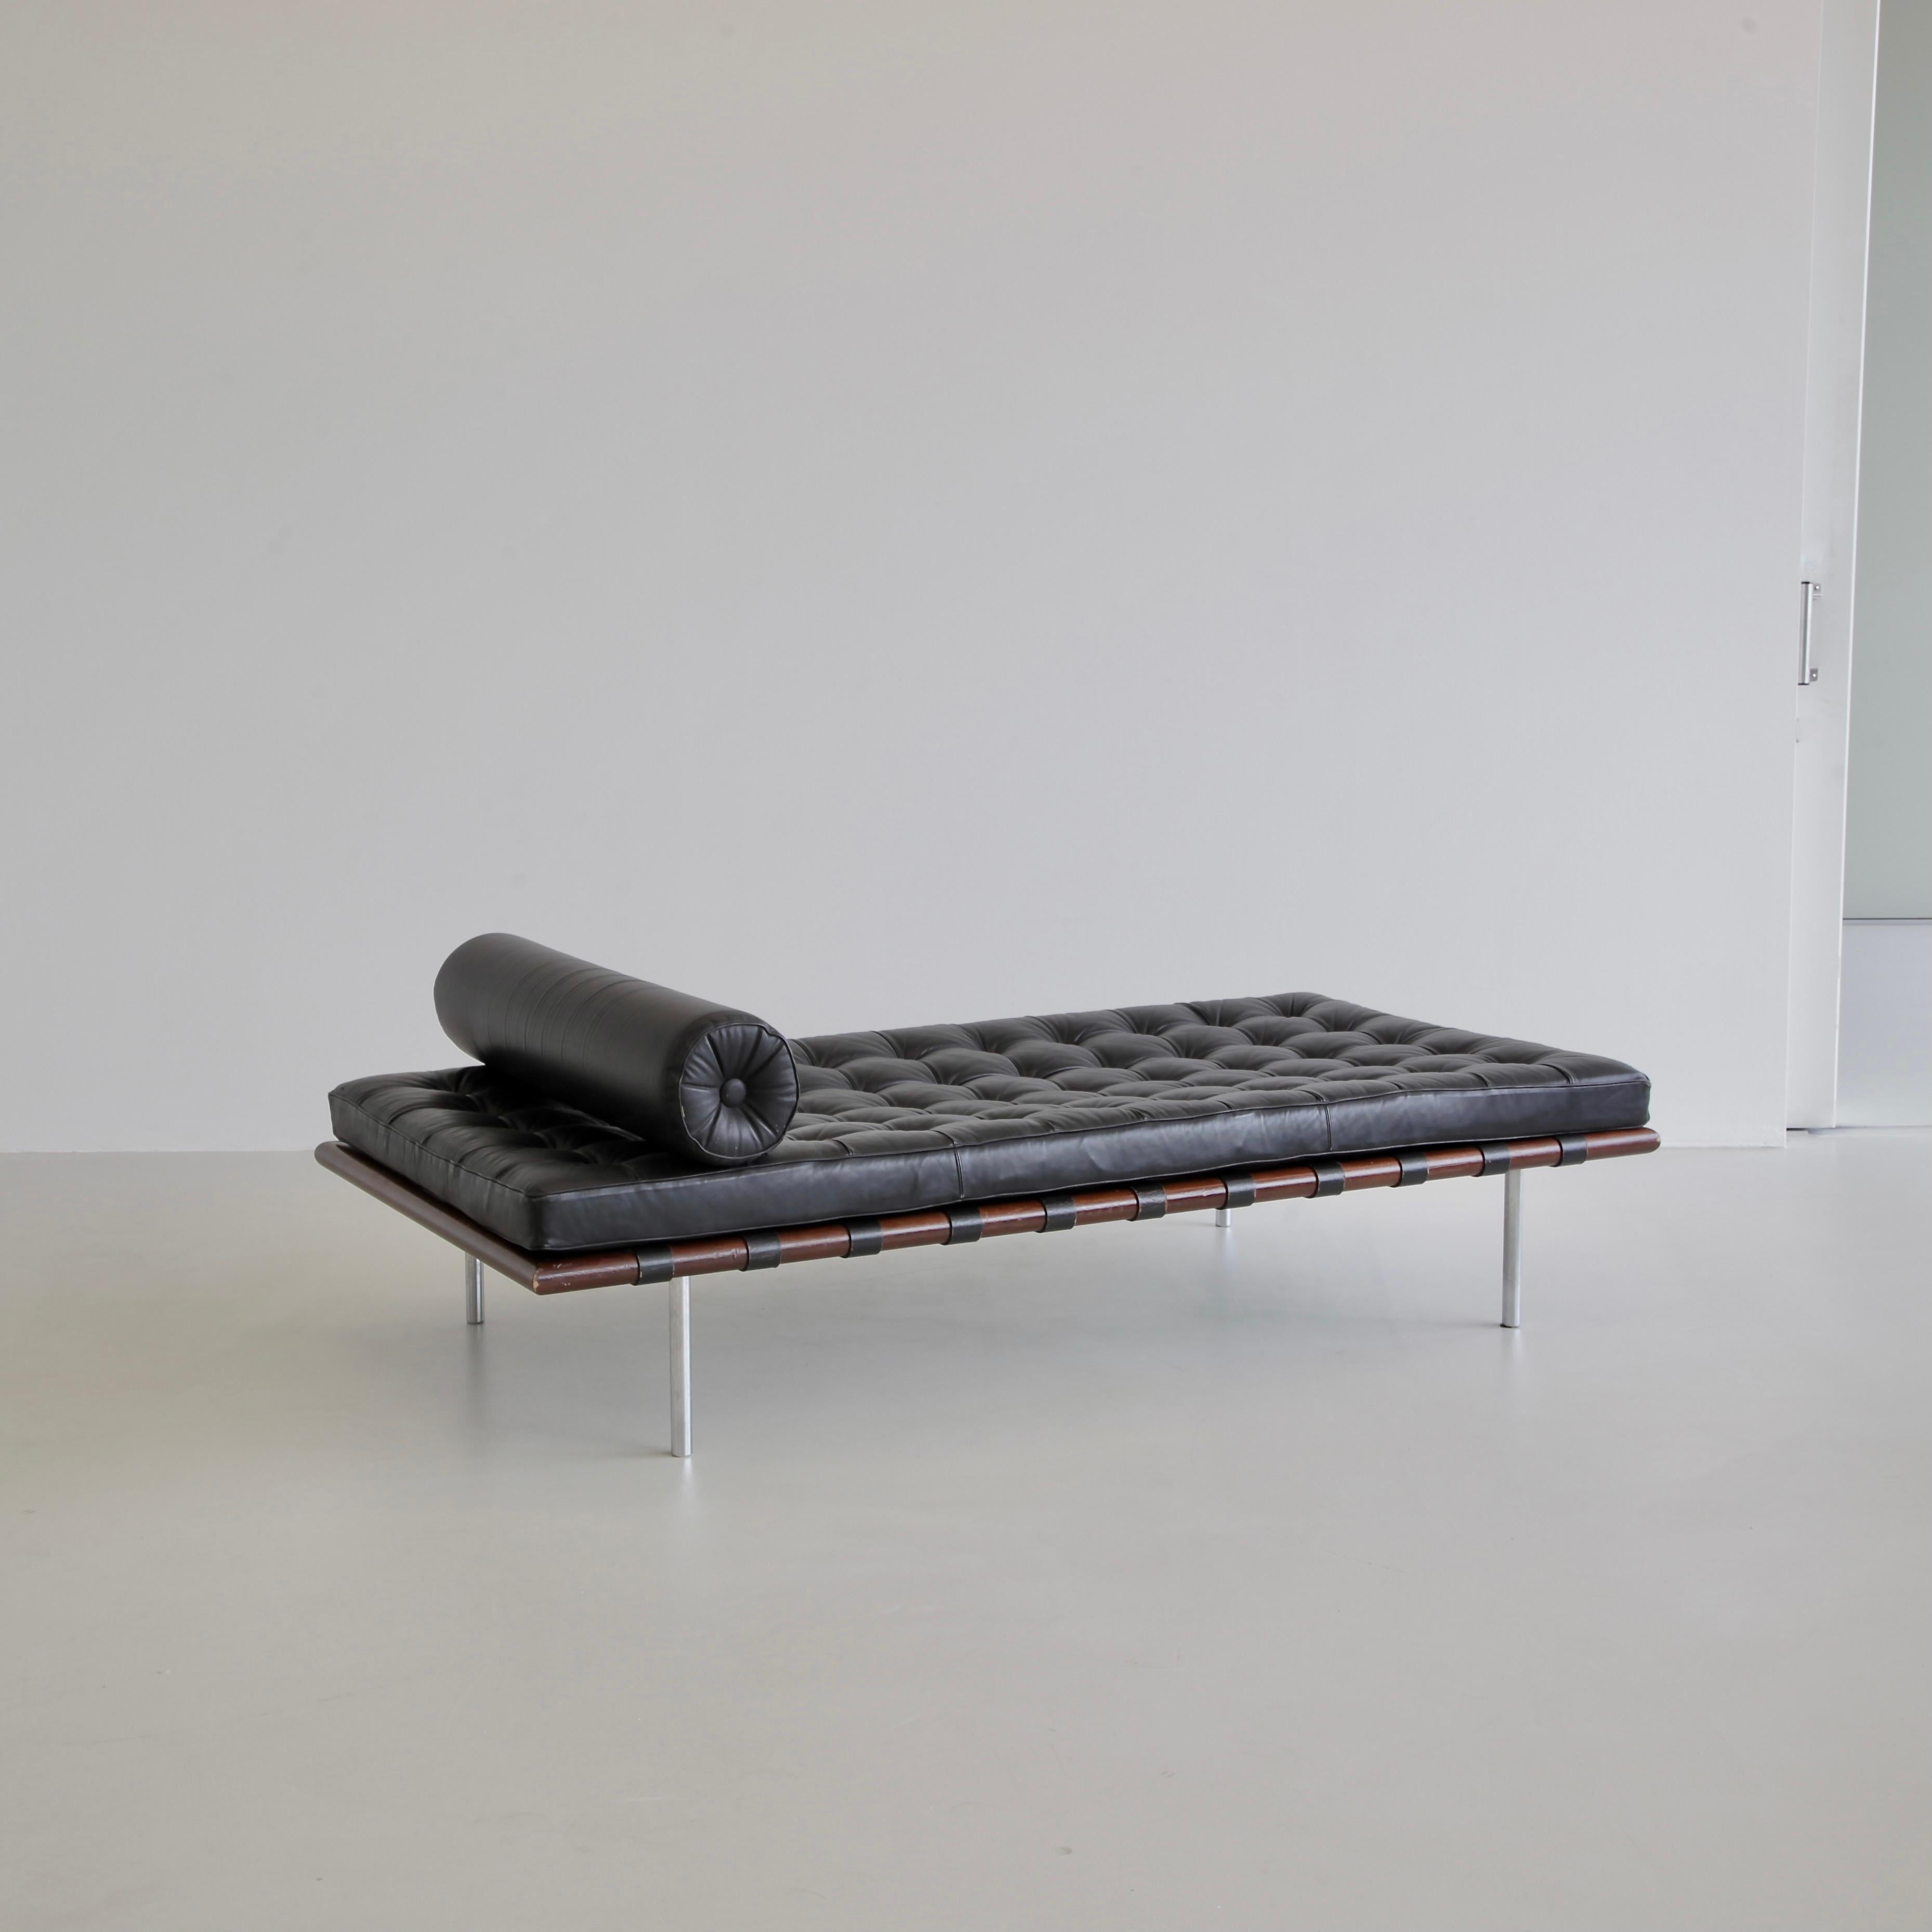 Late 20th Century Barcelona Day Bed, Designed by Mies van der Rohe